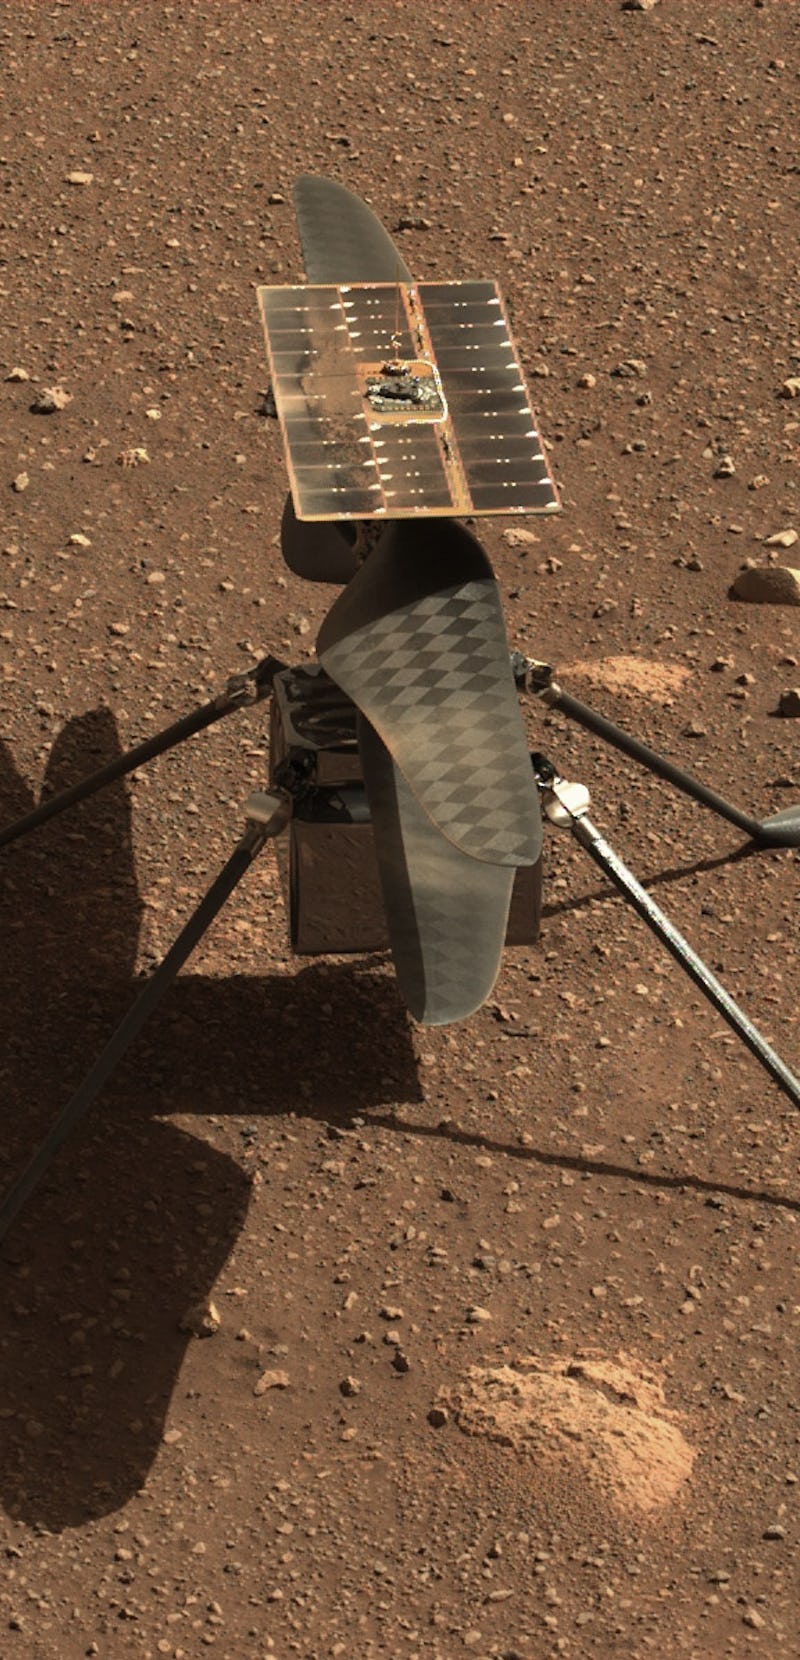 NASA’s Ingenuity Mars helicopter is seen here in a close-up taken by Mastcam-Z, a pair of zoomable c...